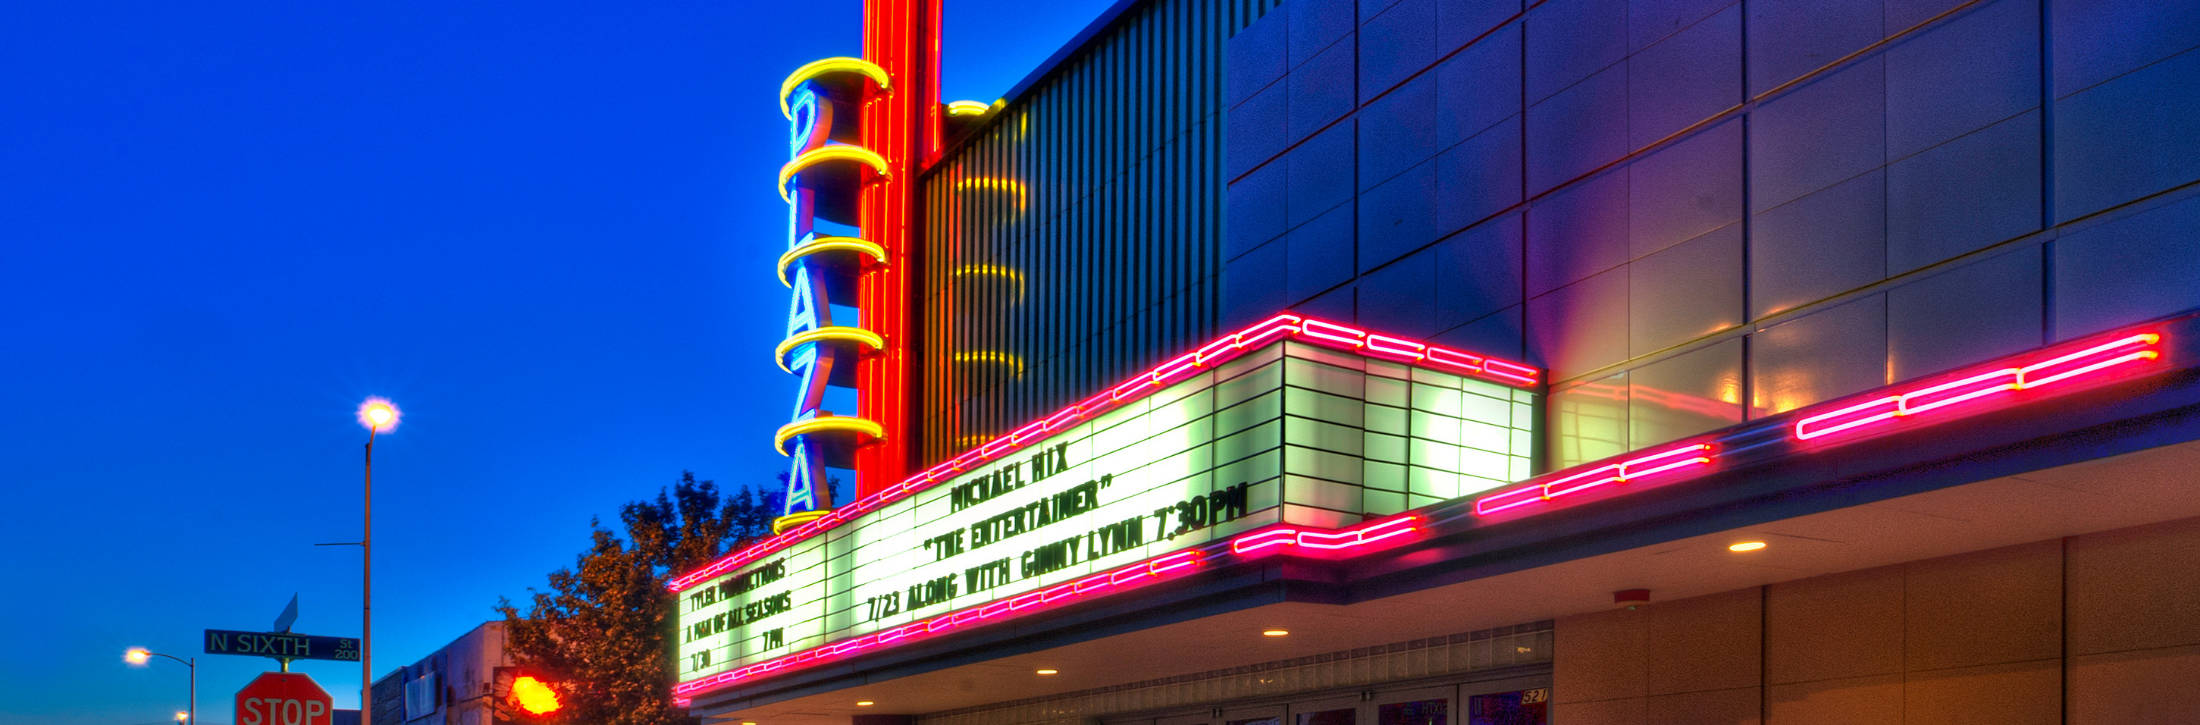 Experience the nostalgia of Plaza Theater in Garland, Texas Wallpaper